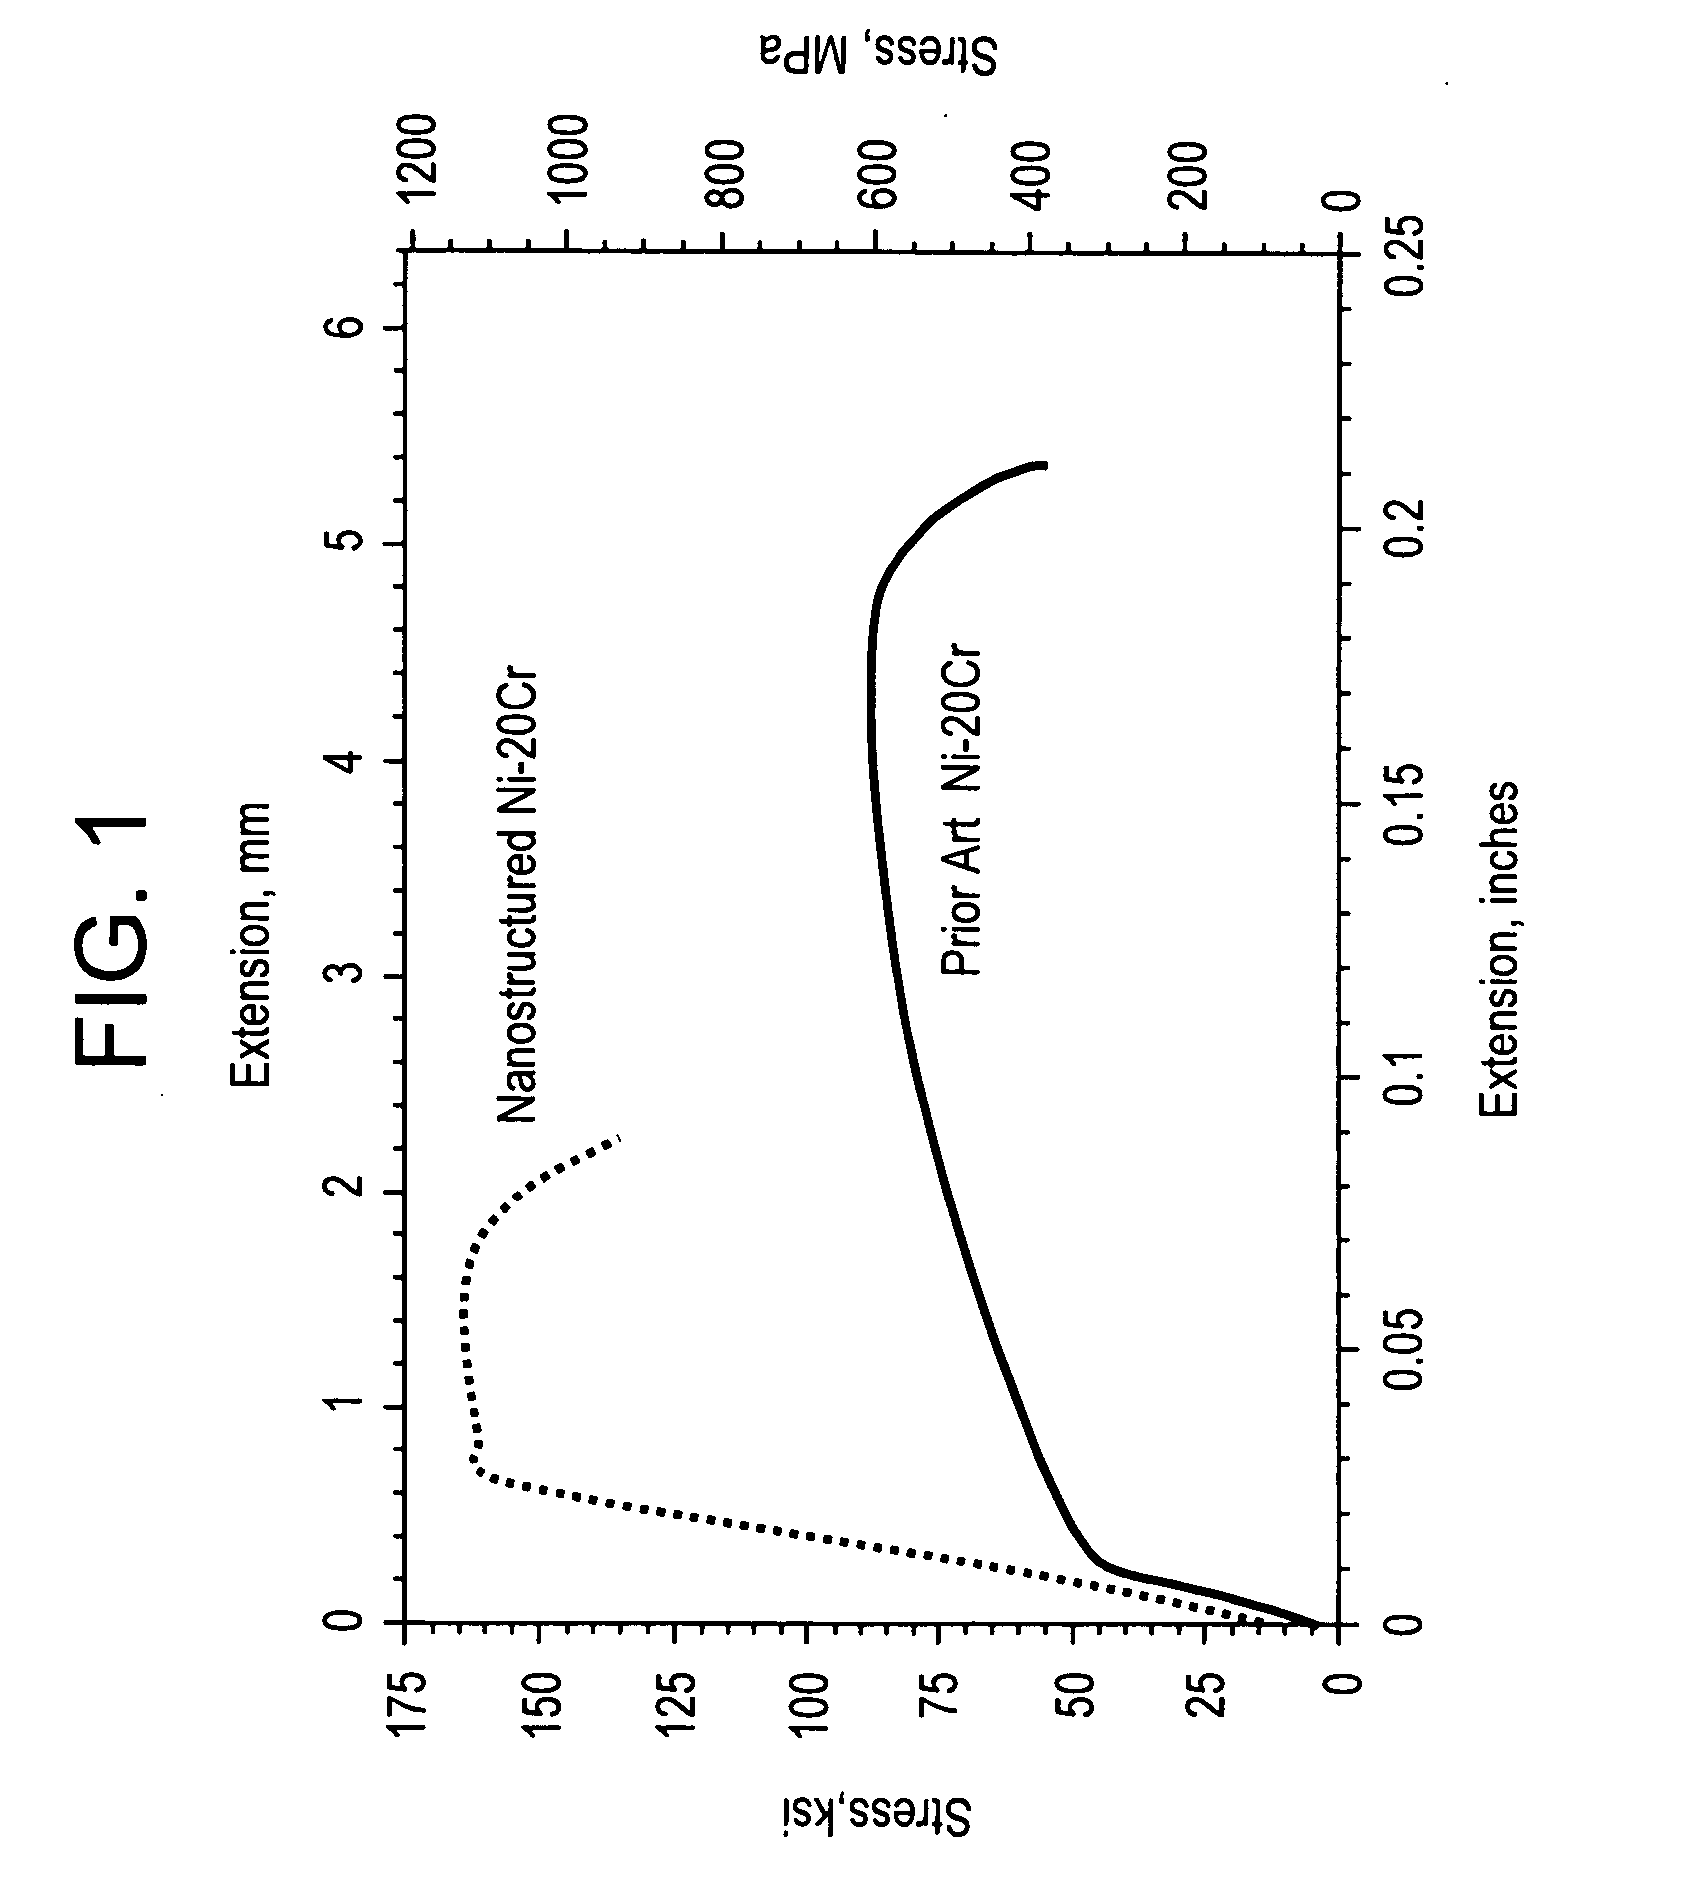 Nanostructured superalloy structural components and methods of making